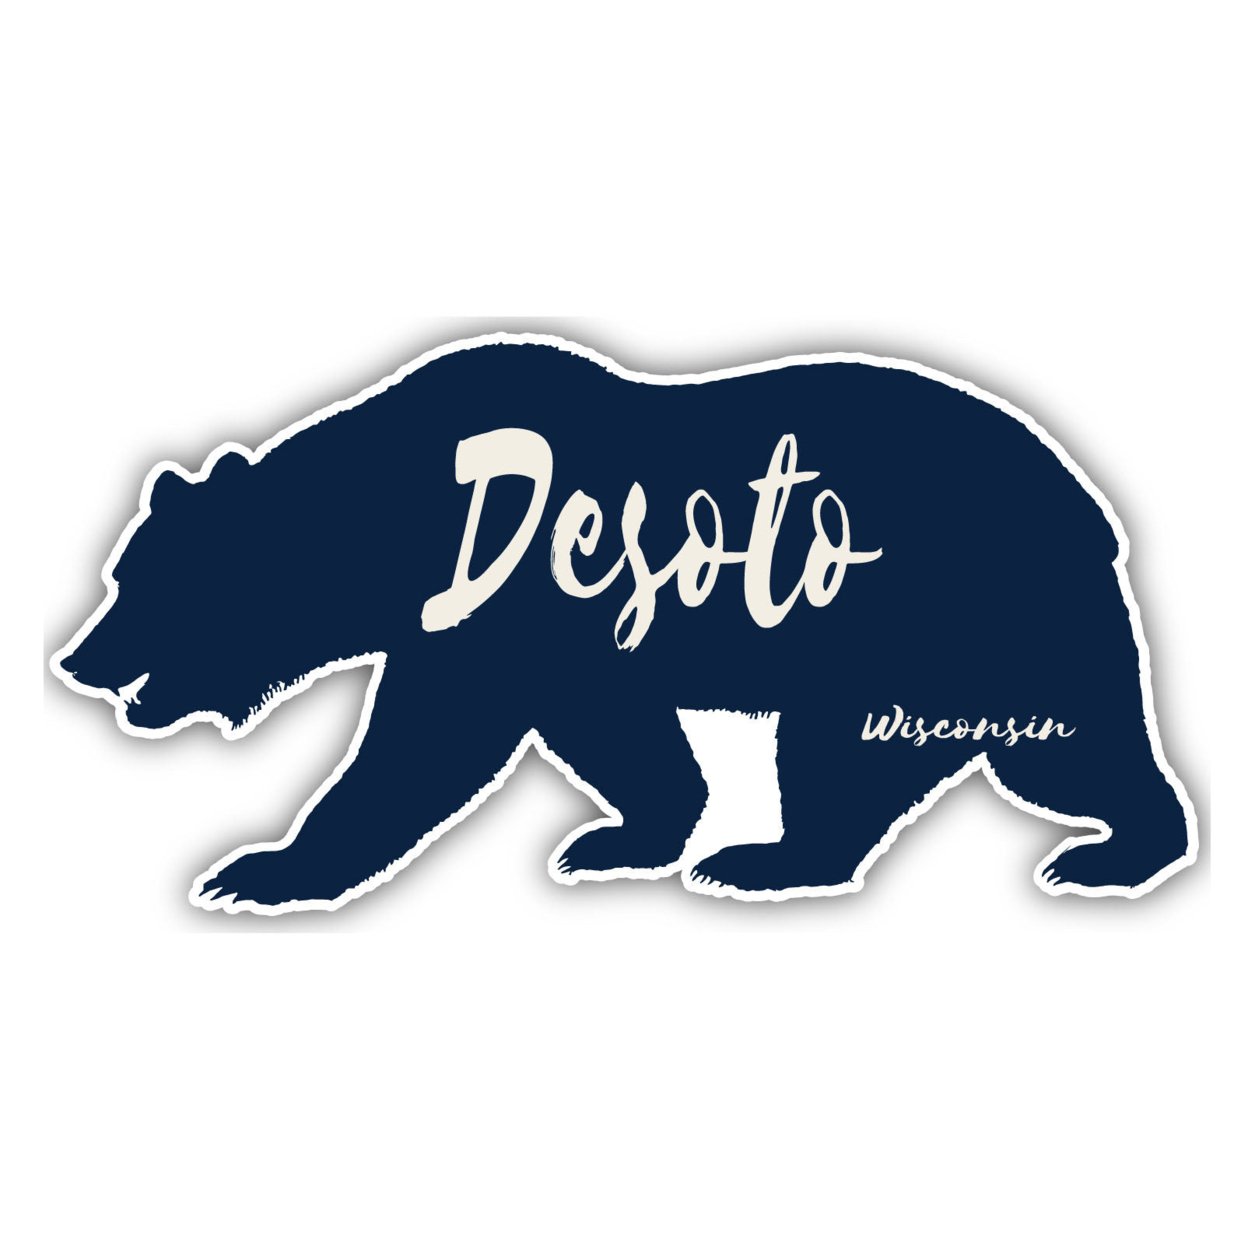 DeSoto Wisconsin Souvenir Decorative Stickers (Choose Theme And Size) - 4-Pack, 6-Inch, Bear